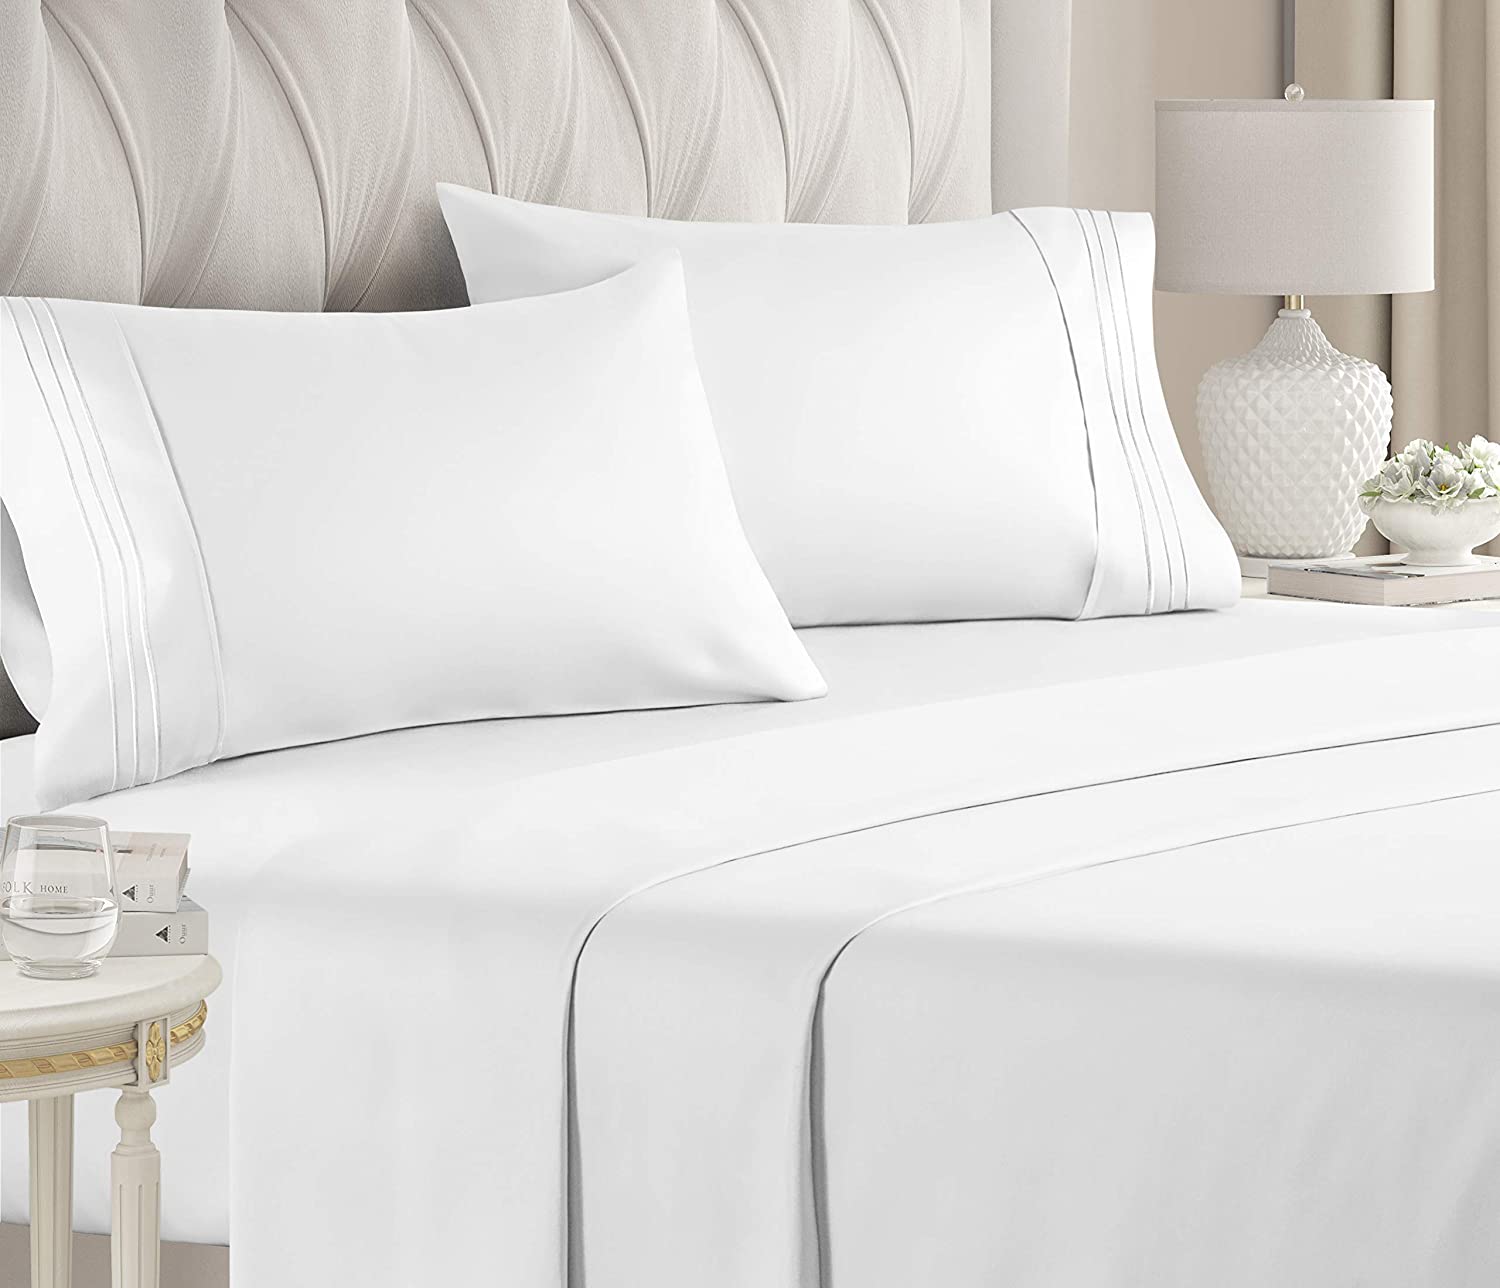 Extra Soft Hotel Luxury Bed Sheets 4 Piece Queen Size Sheet Set Deep for sale online 